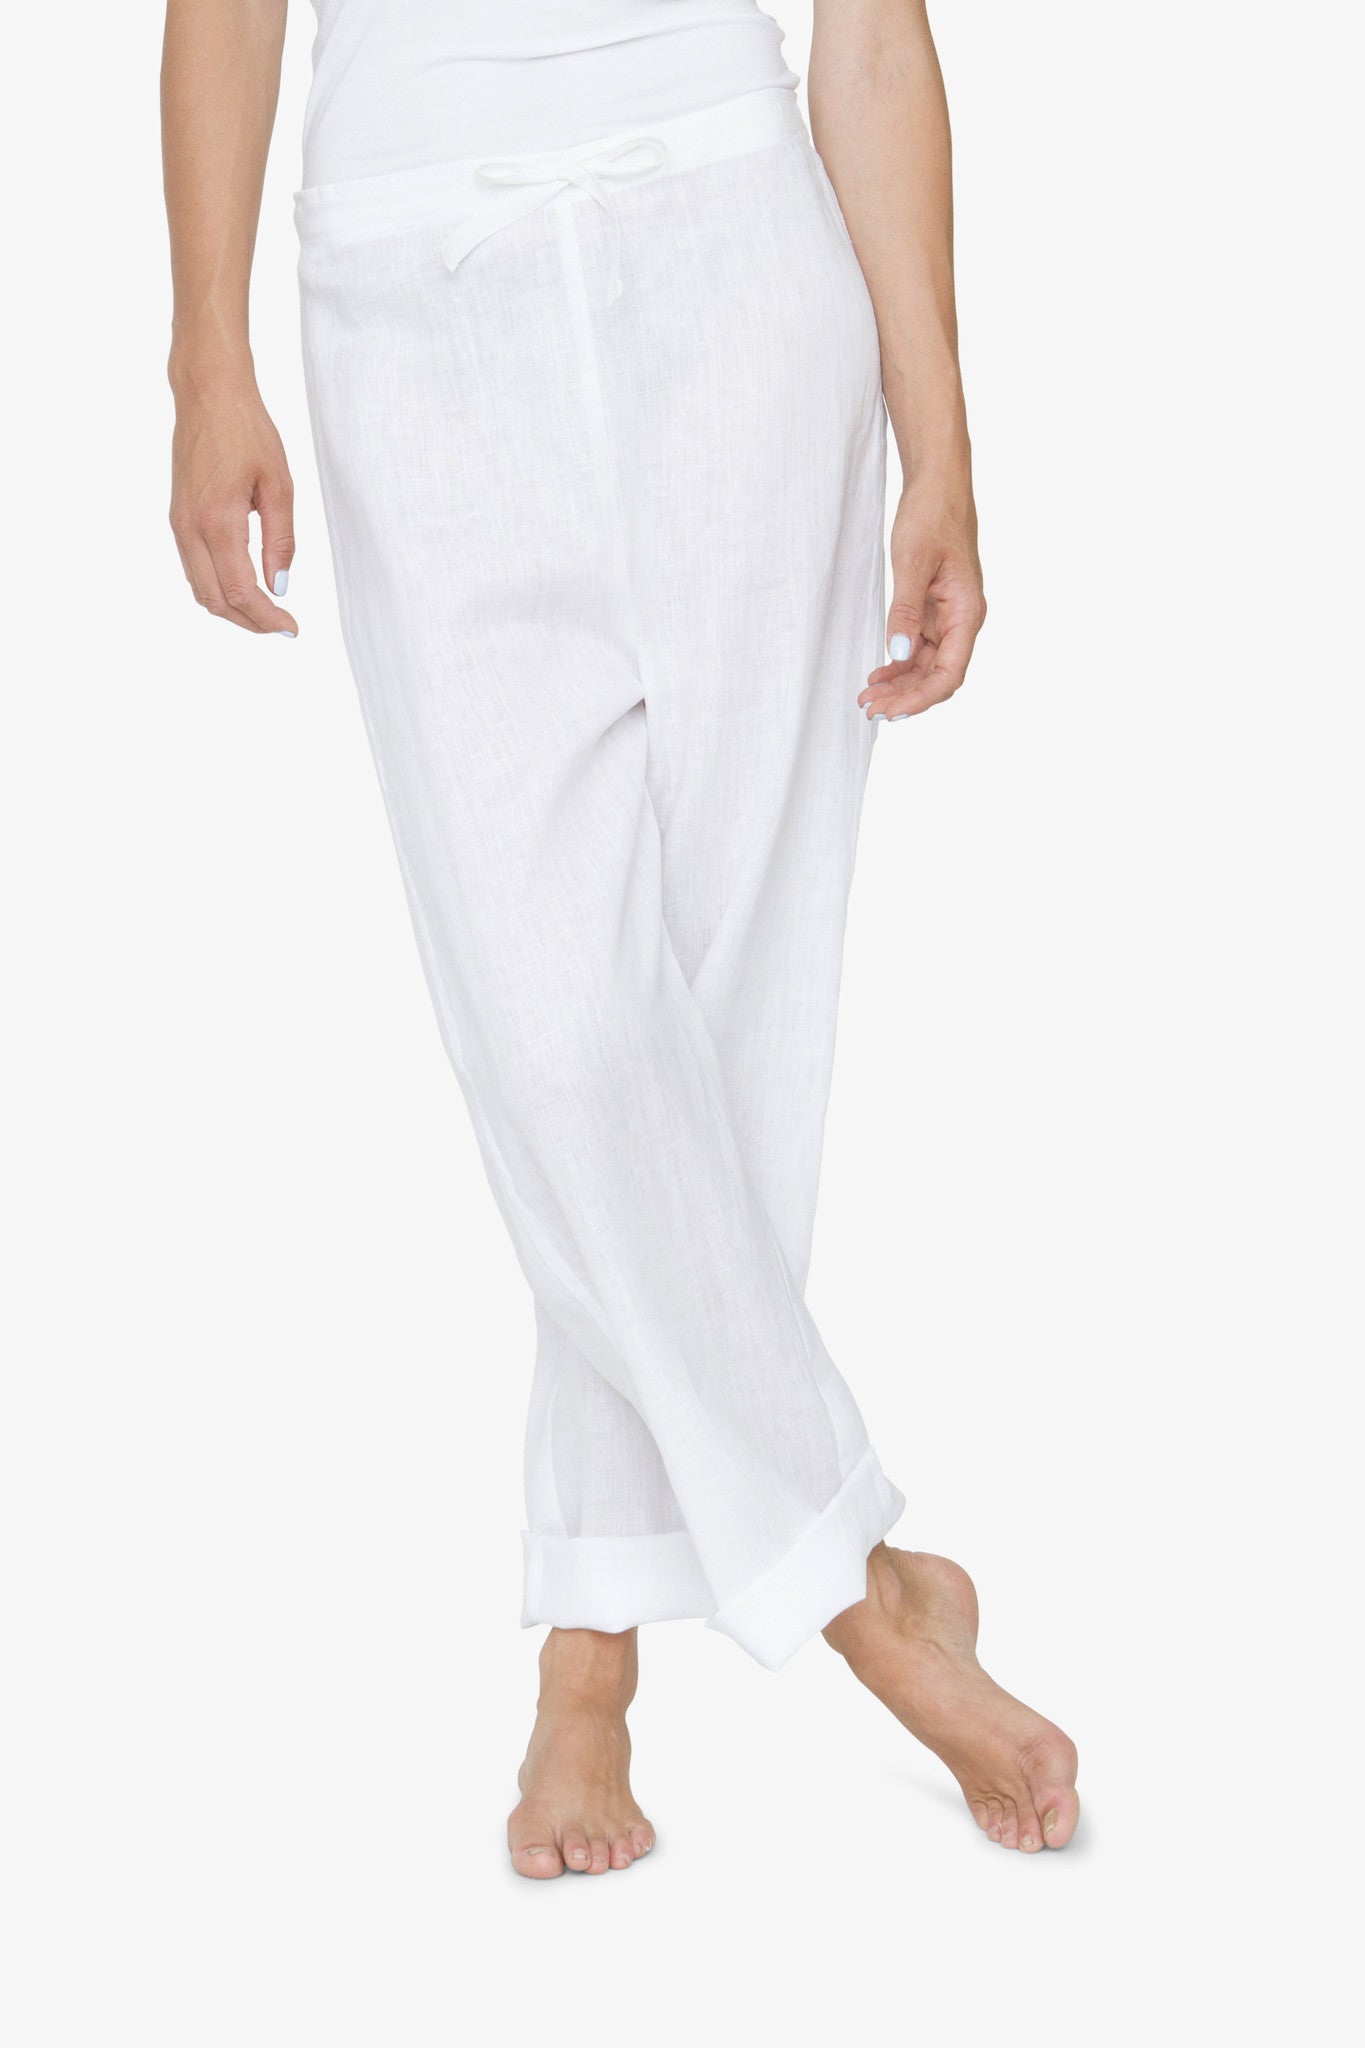 front view classic lounge pants in white linen by the Sleep Shirt